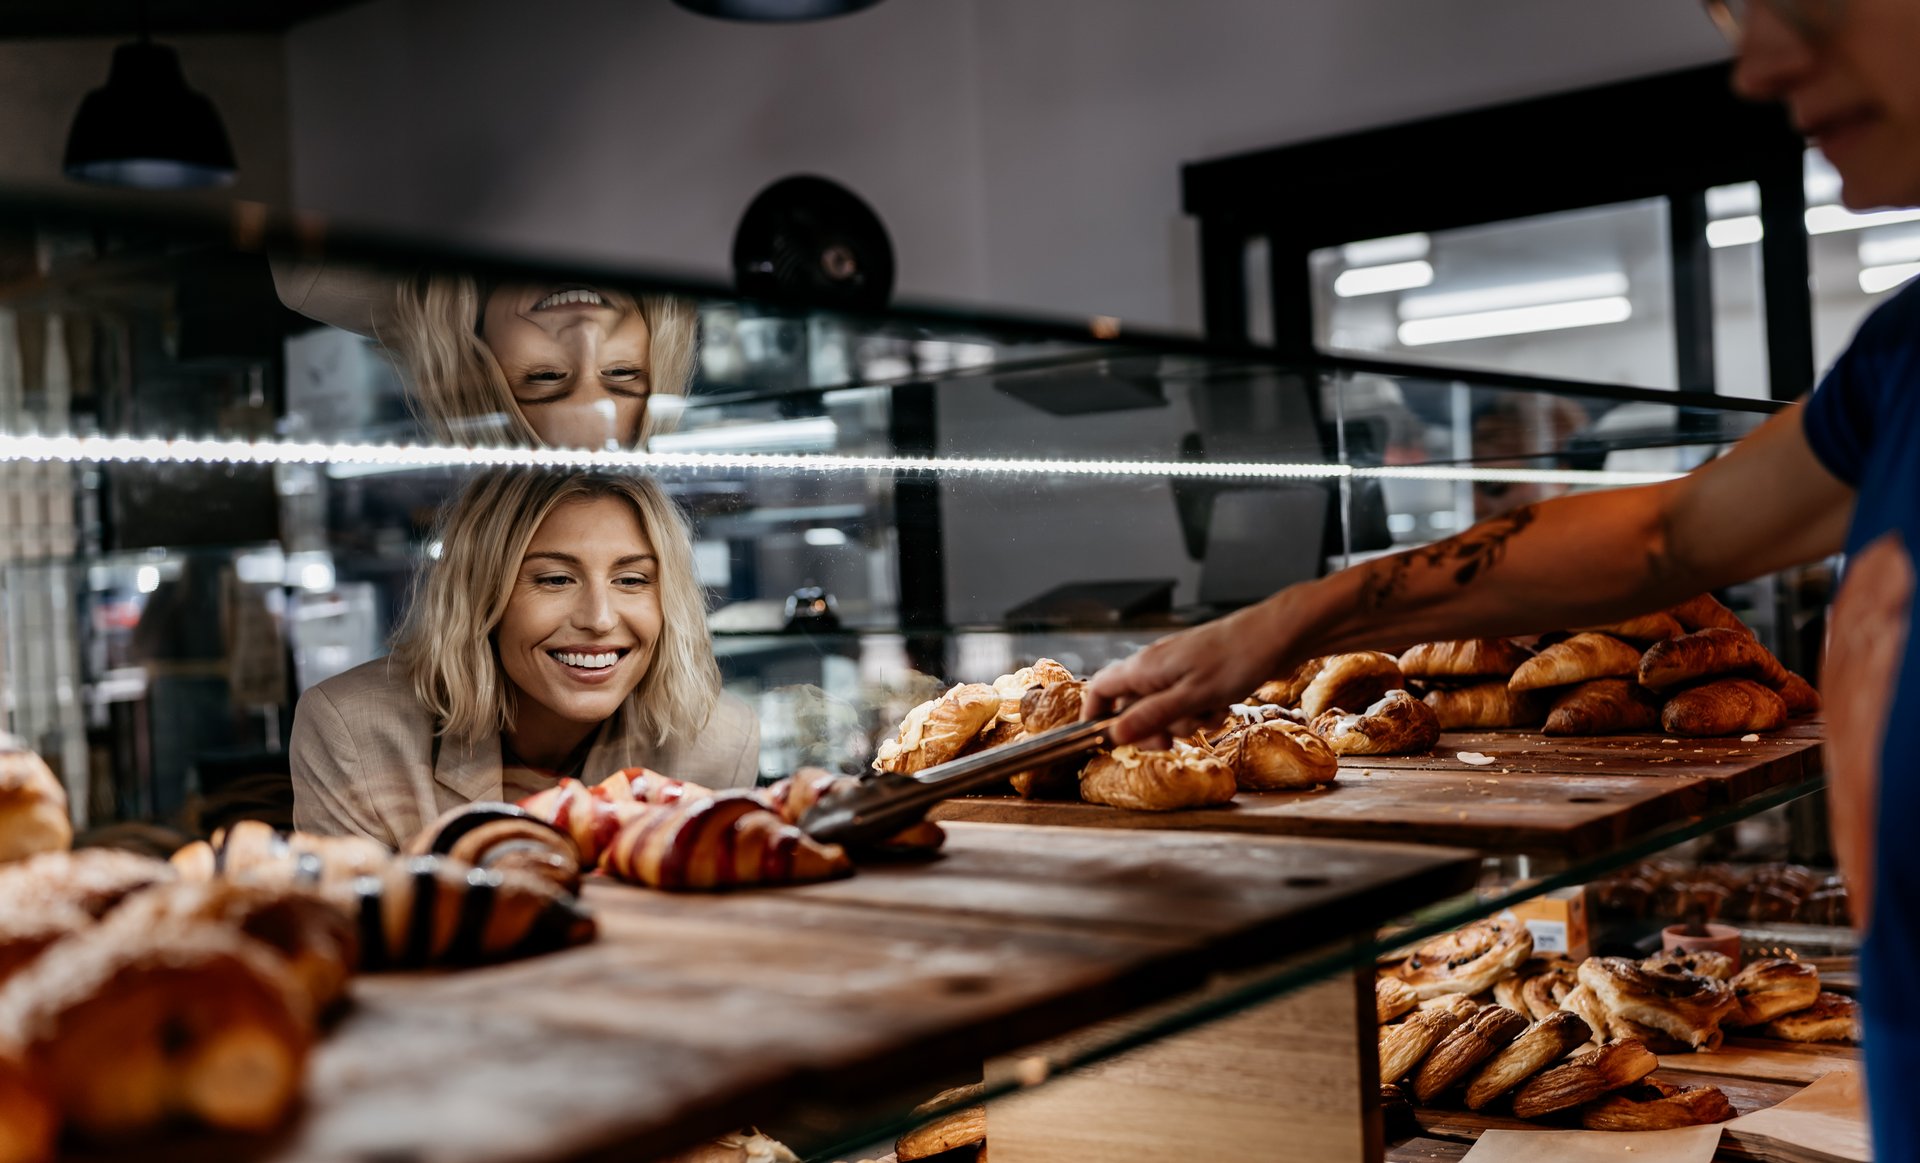 A woman with short blonde hair looks through a glass pastry cabinet as a worker picks up a croissant with tongs.